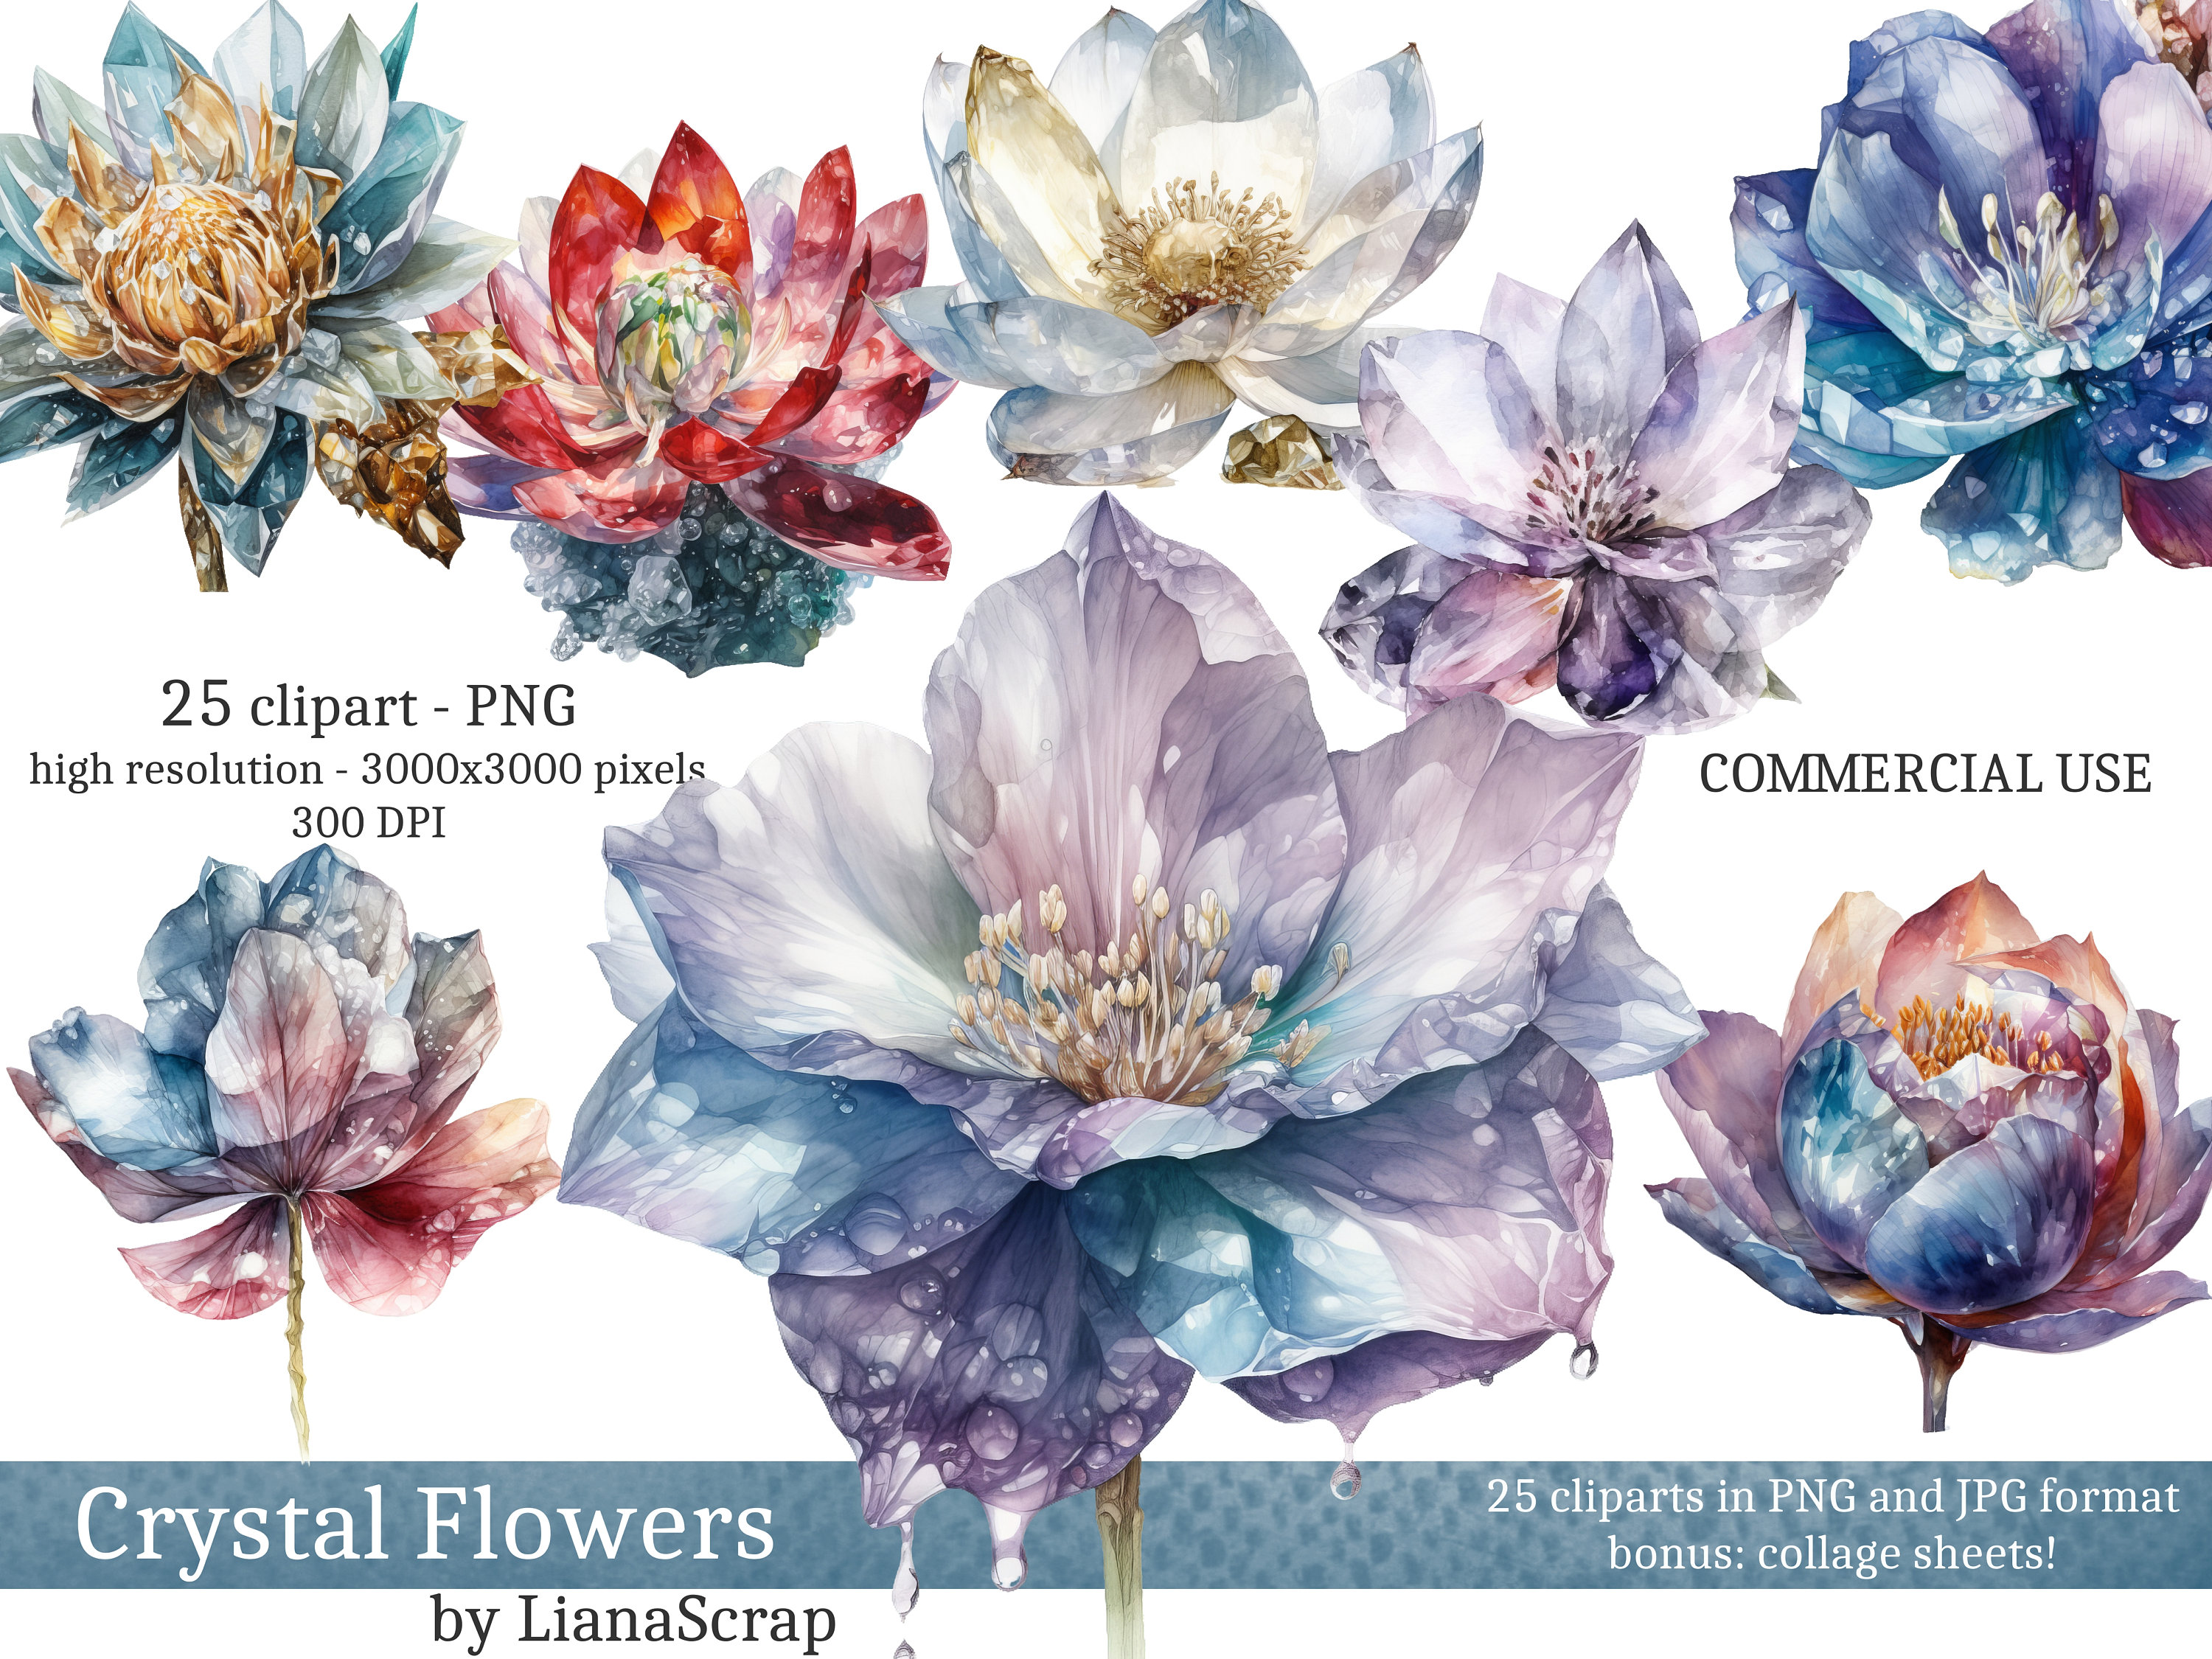 Crystal Flowers Clipart PNG Set, 25 Crystal Flowers Clipart, Commercial Use  Clip Art, Floral Watercolor Art, PNG Crystal Theme Illustrations 